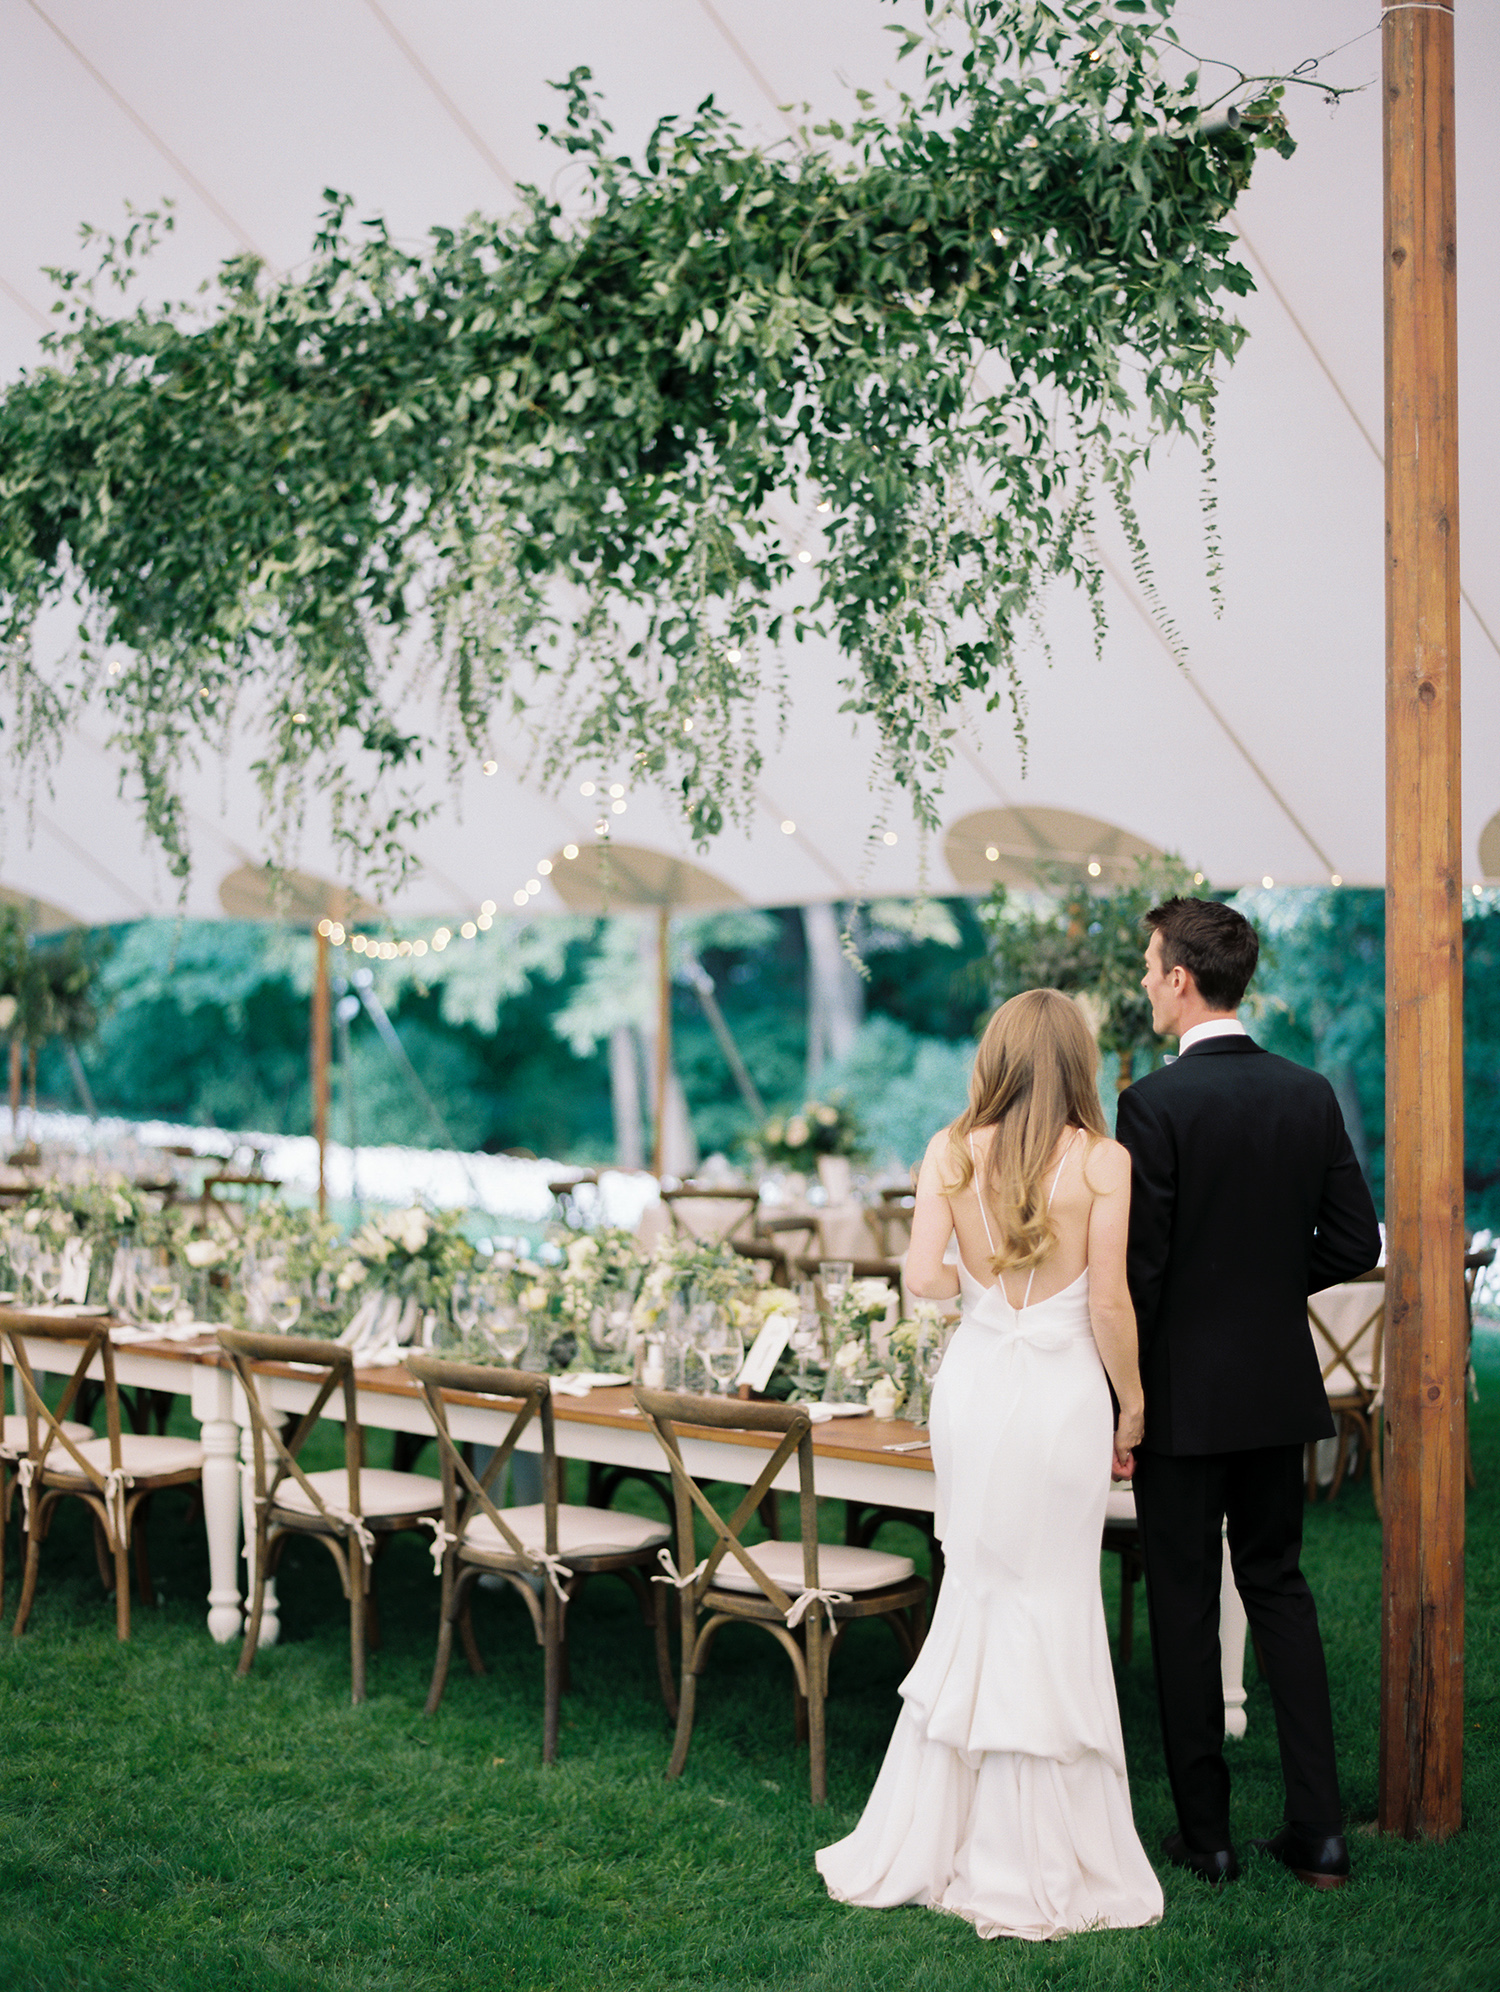 Outdoor wedding reception at Living Roots Winery in upstate New York